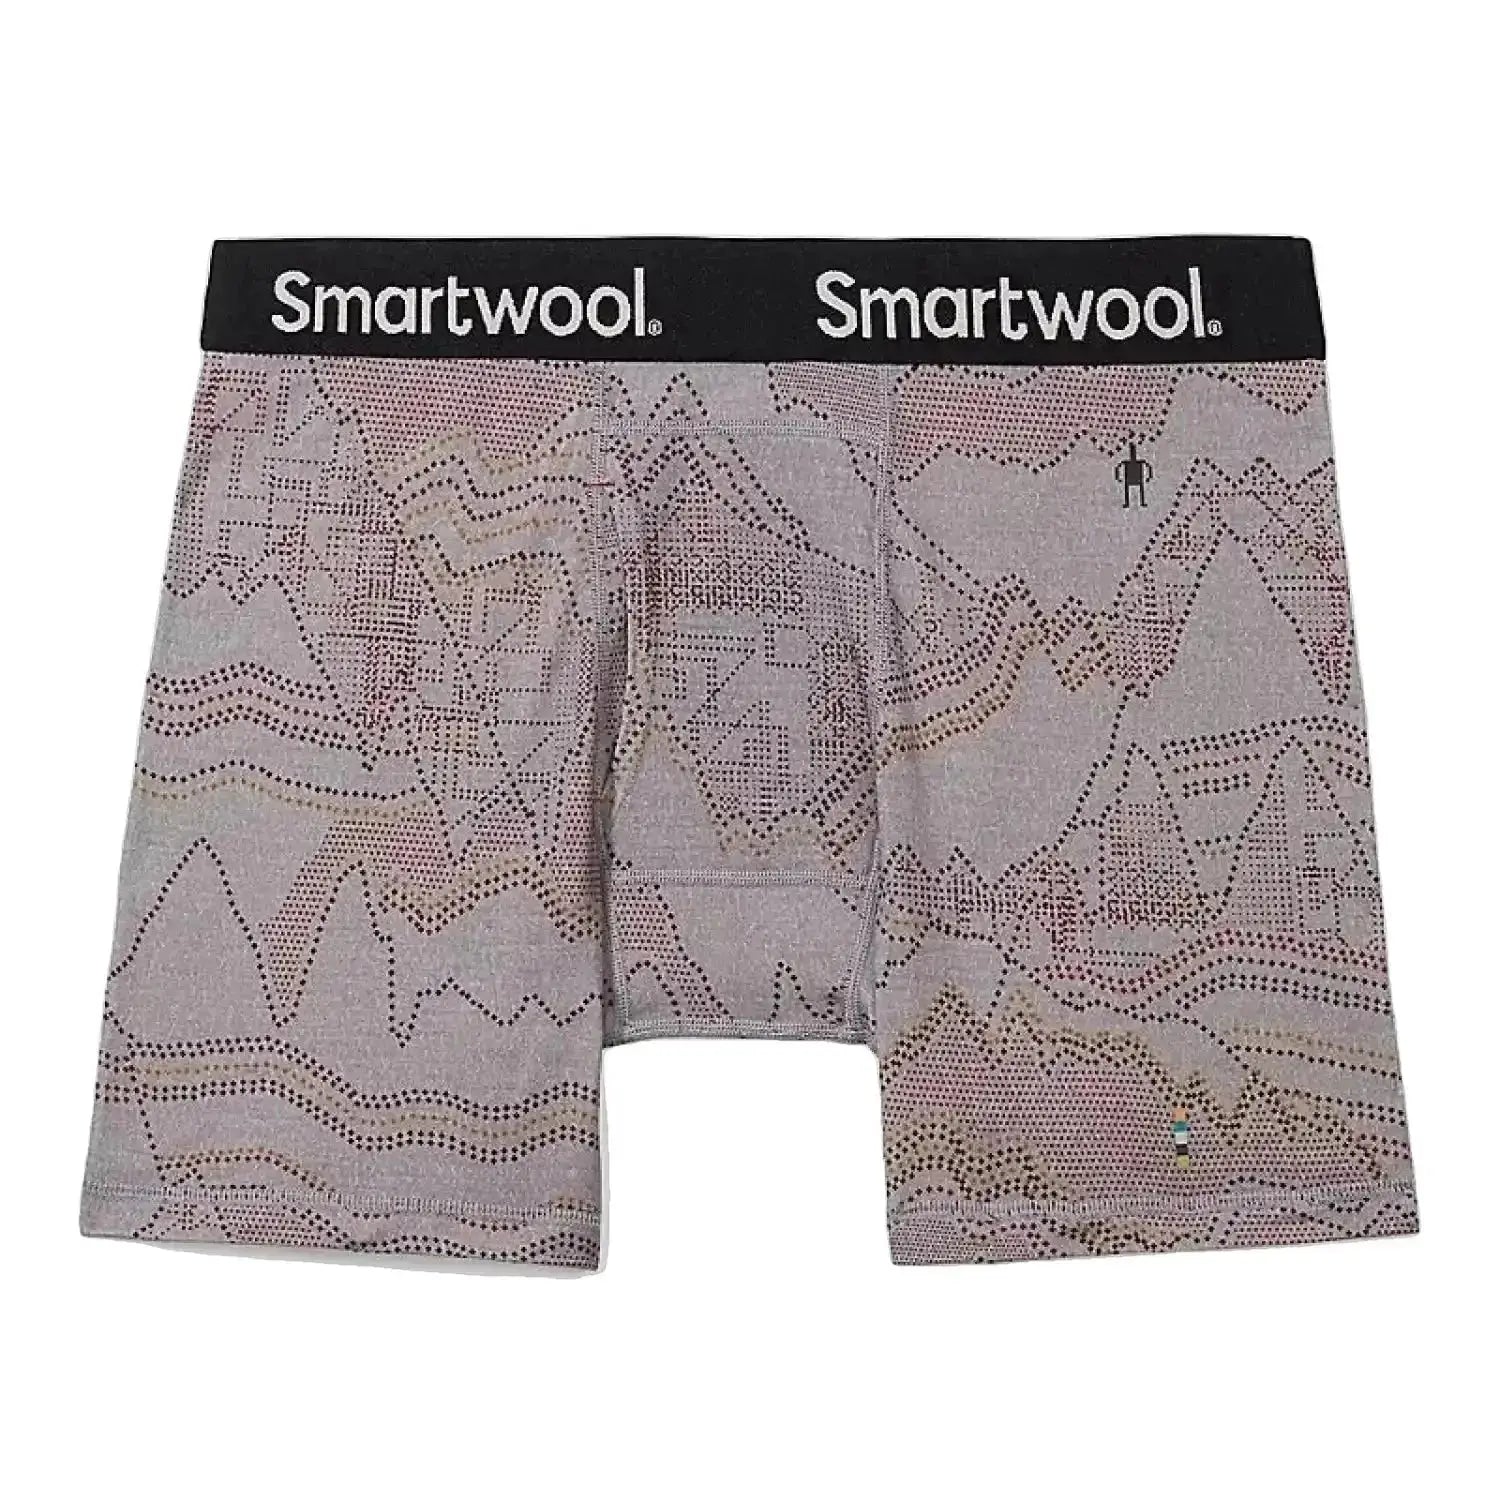 Smartwool Merino Print Boxer Brief Front View